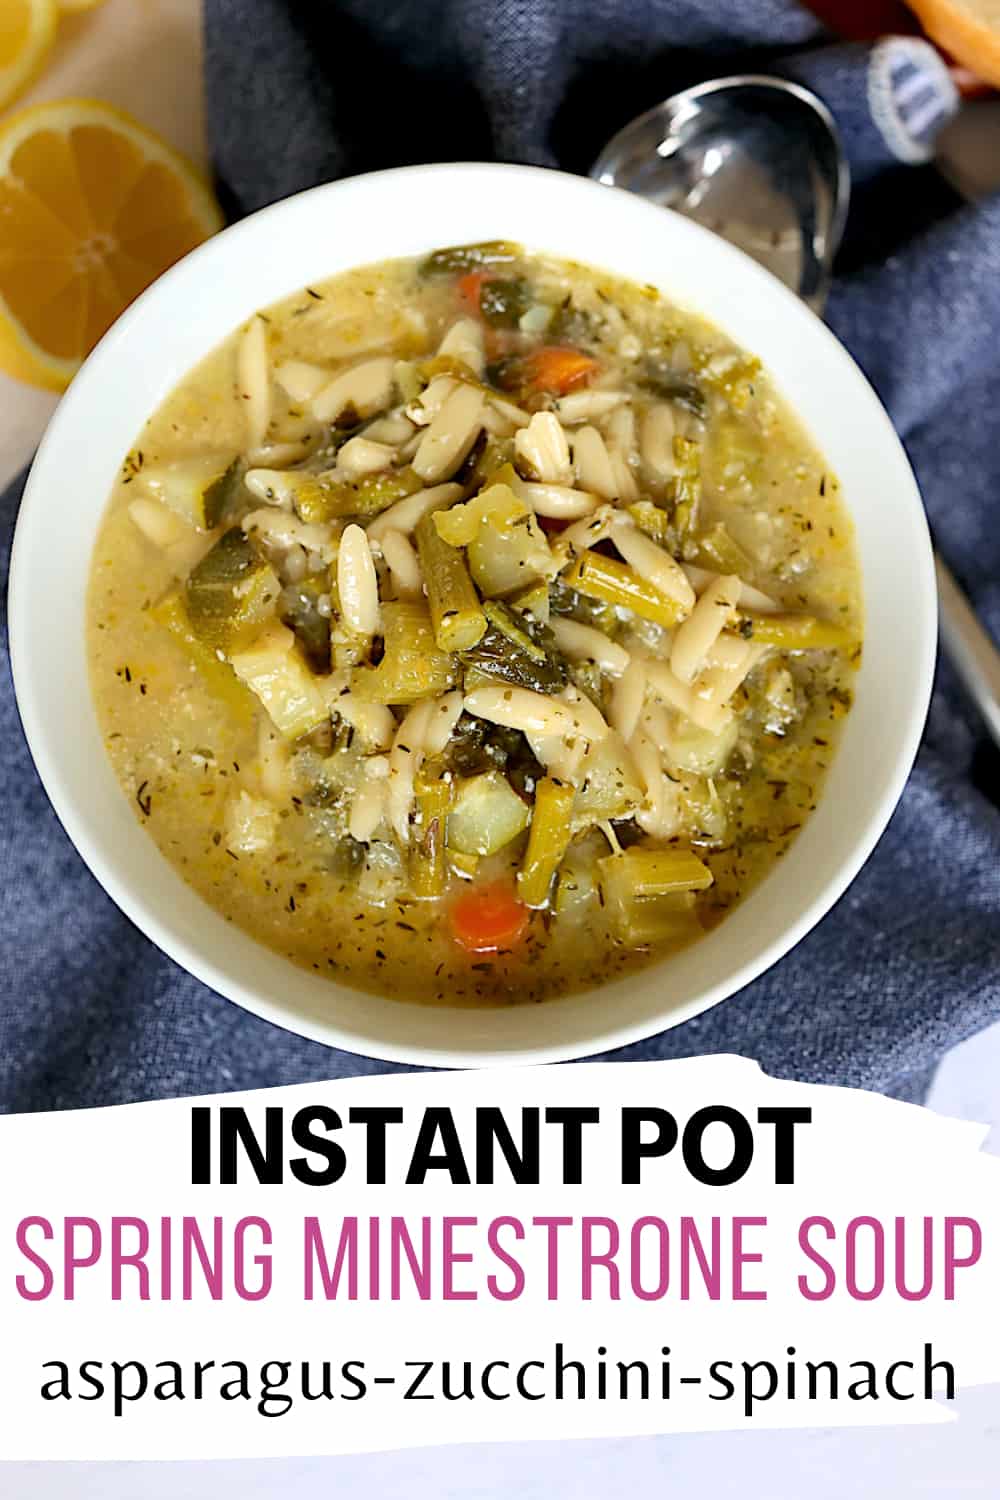 Instant Pot Spring Minestrone Soup